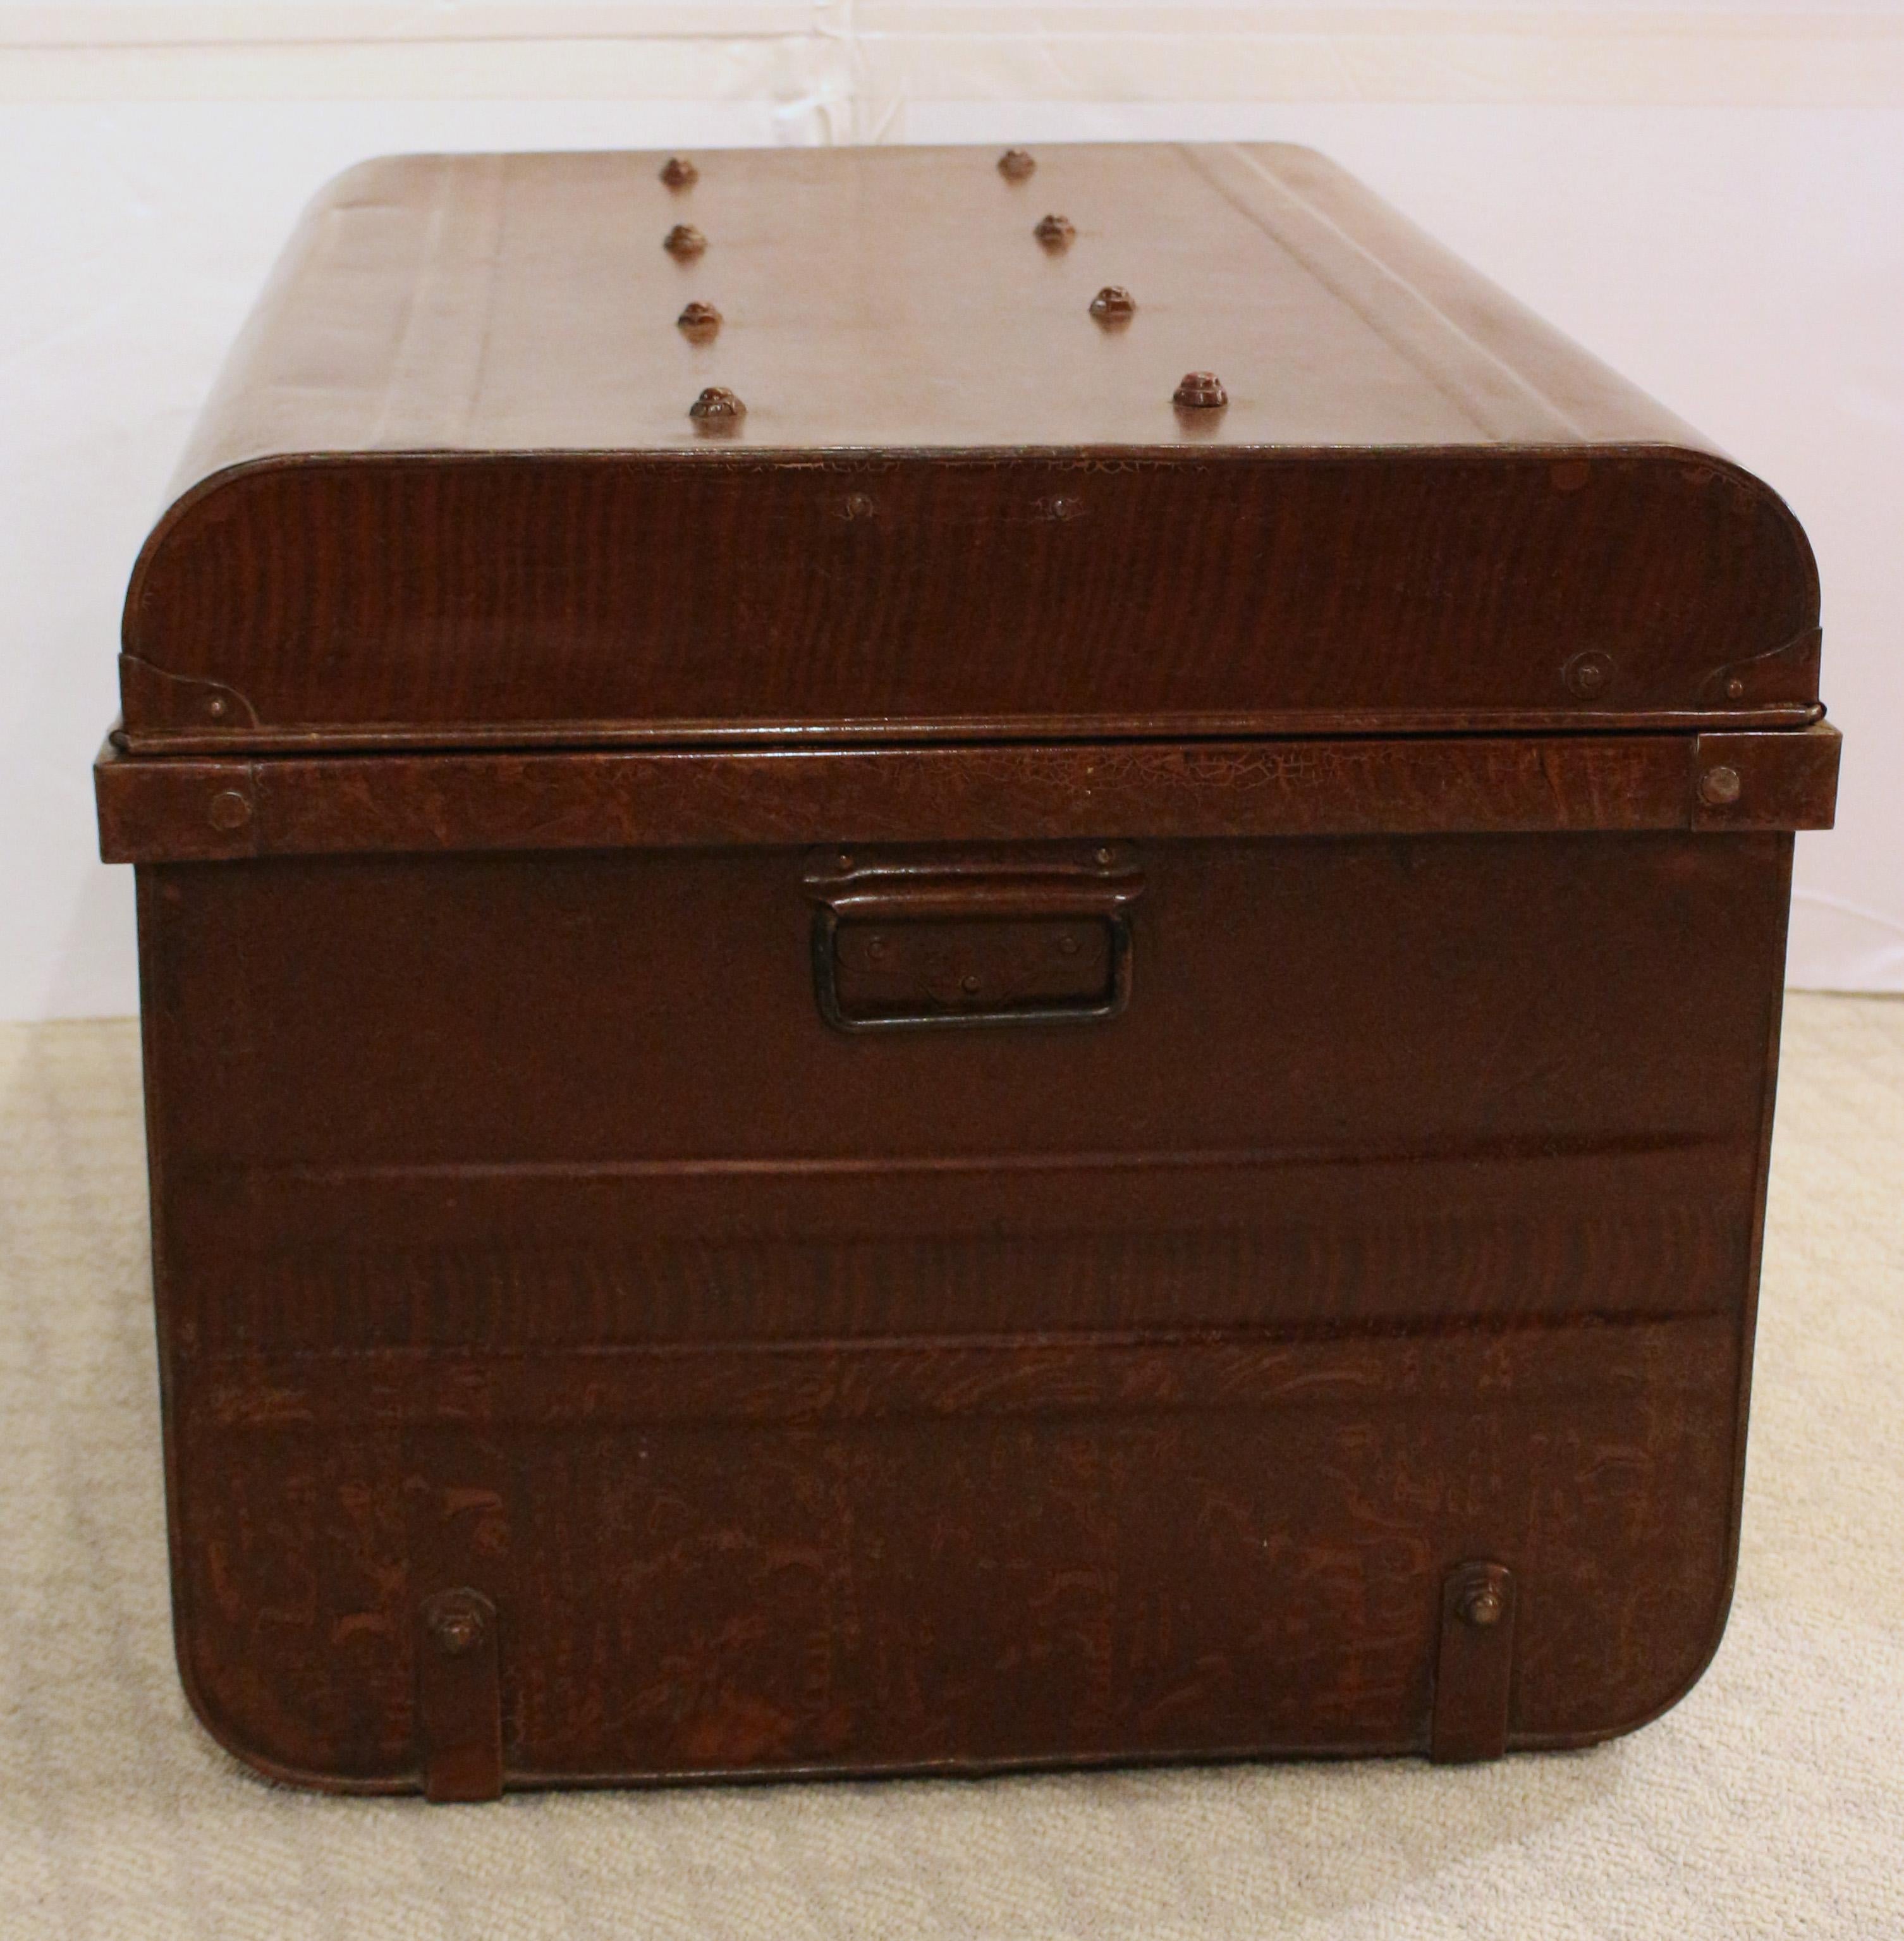 English Late 19th-Early 20th Century Steel Trunk For Sale